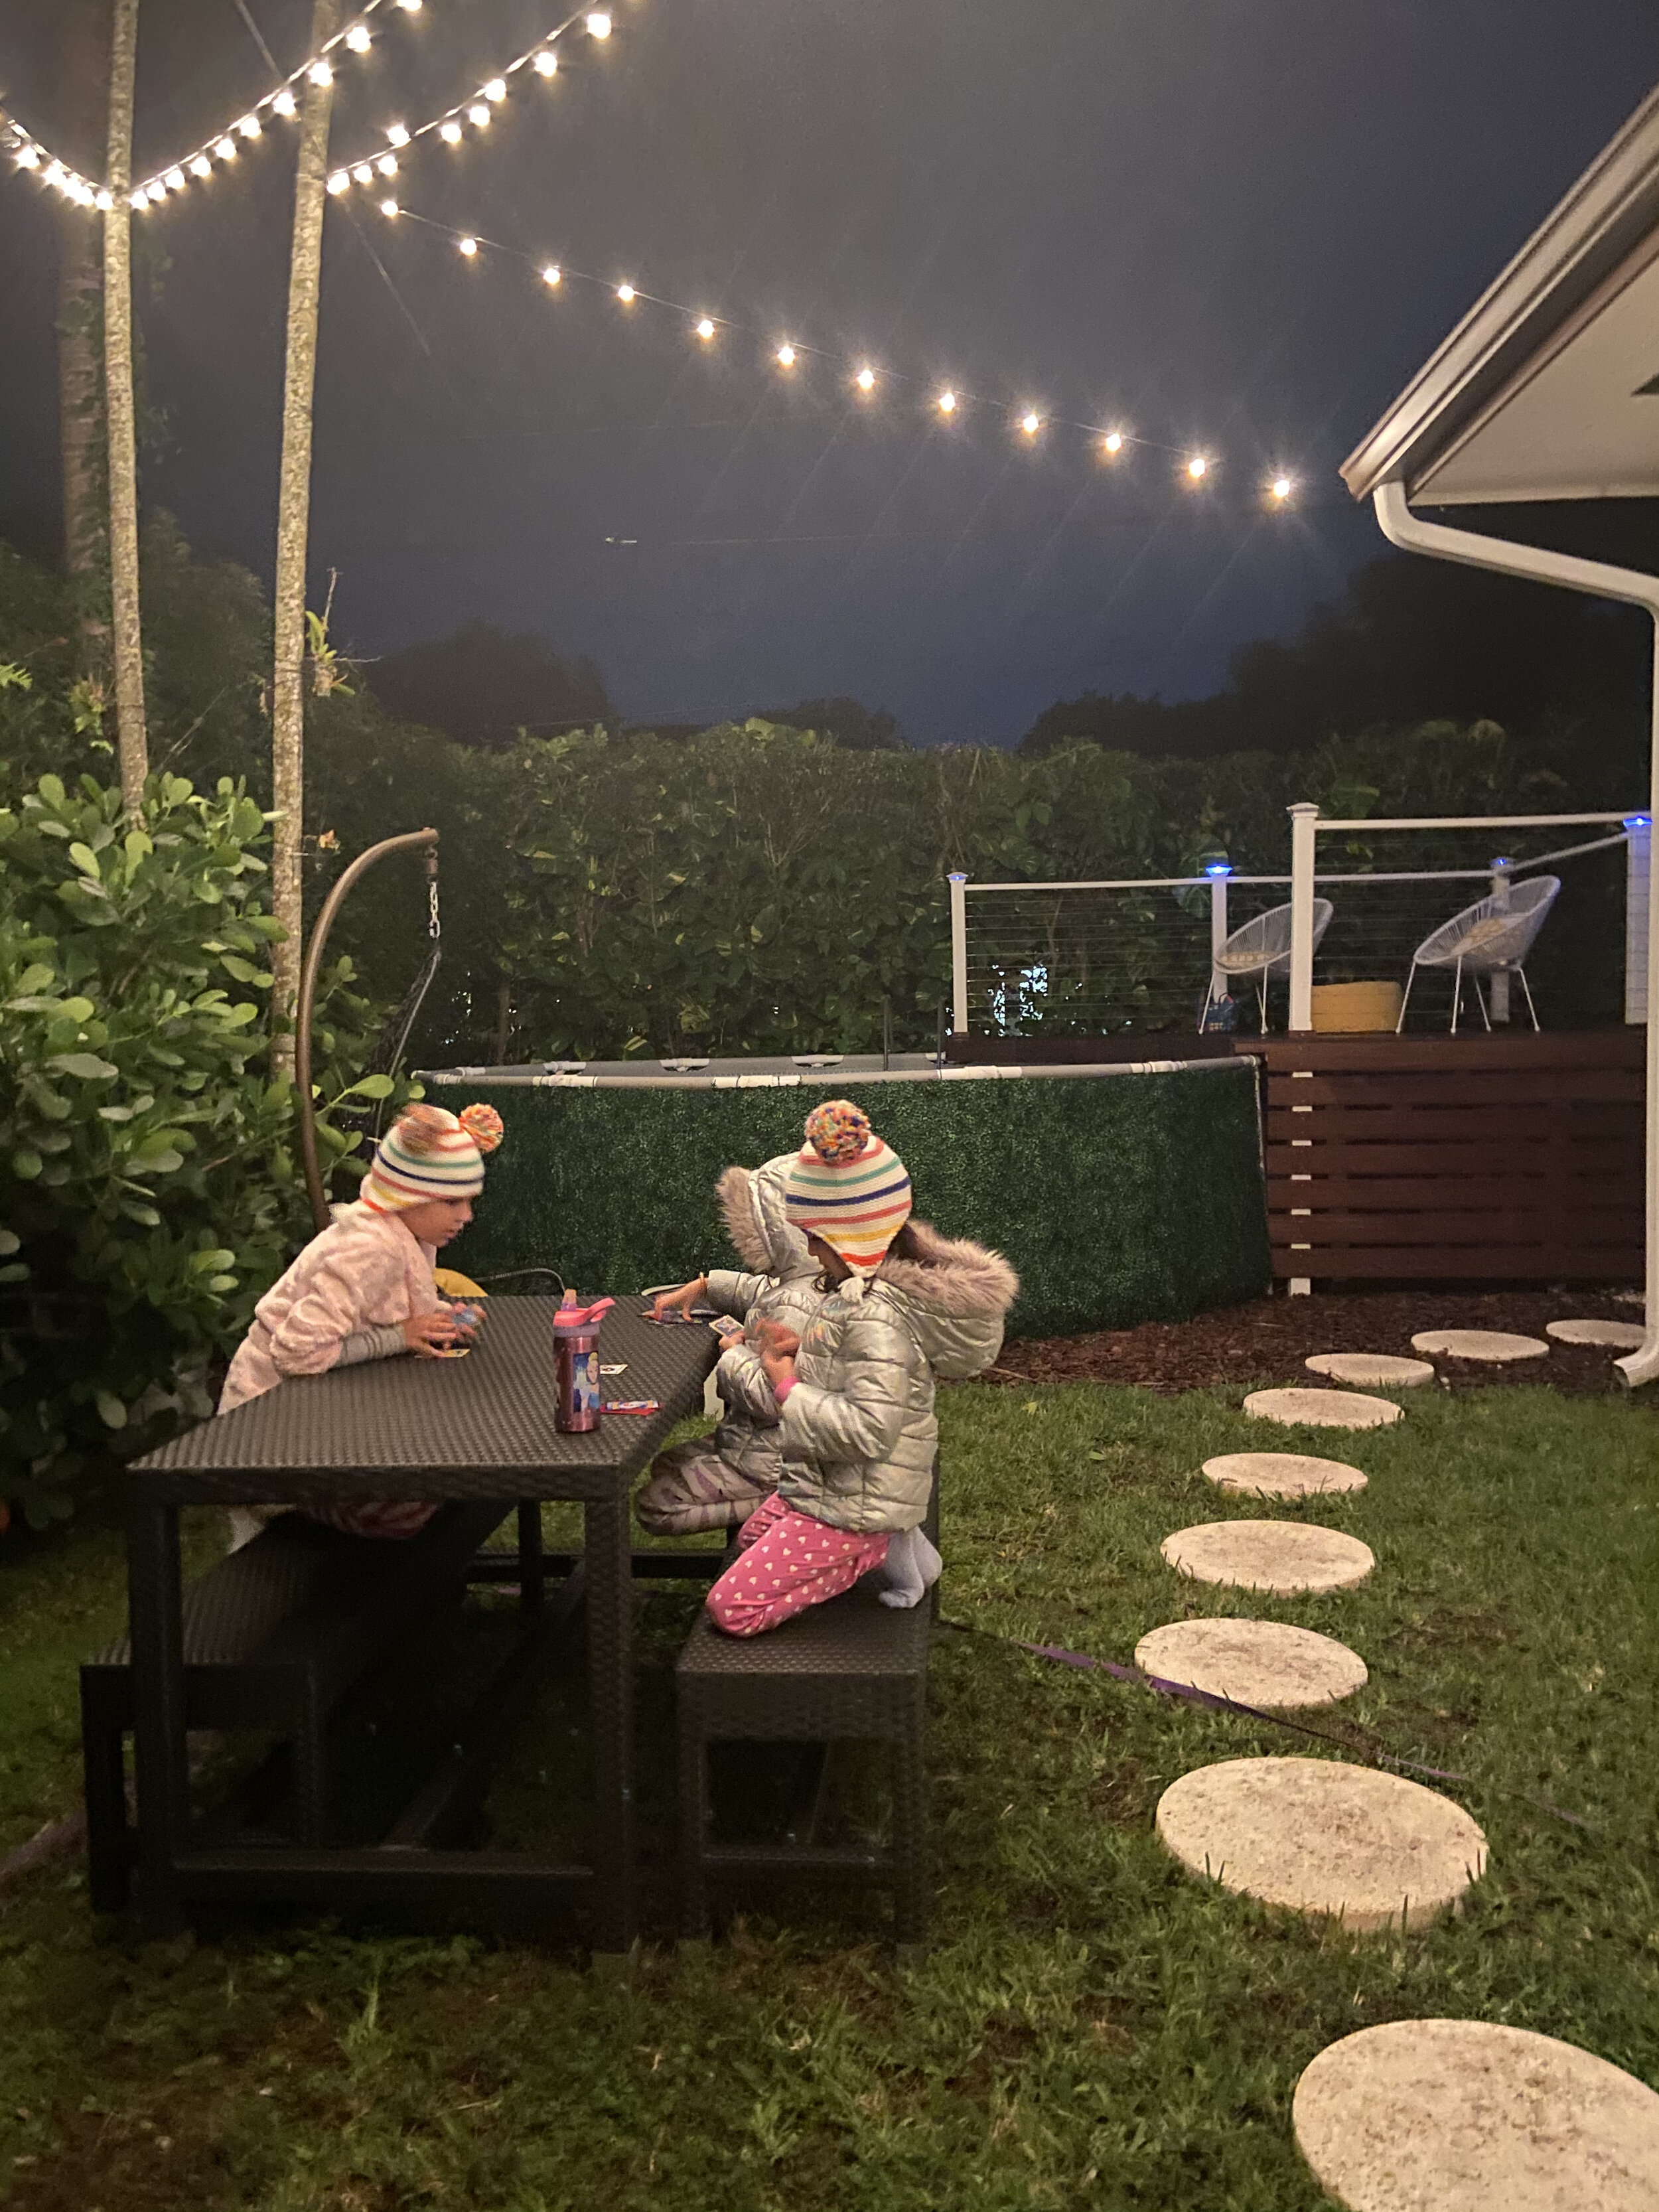 Miami Winter nights under bistro lights in our newly designed backyard